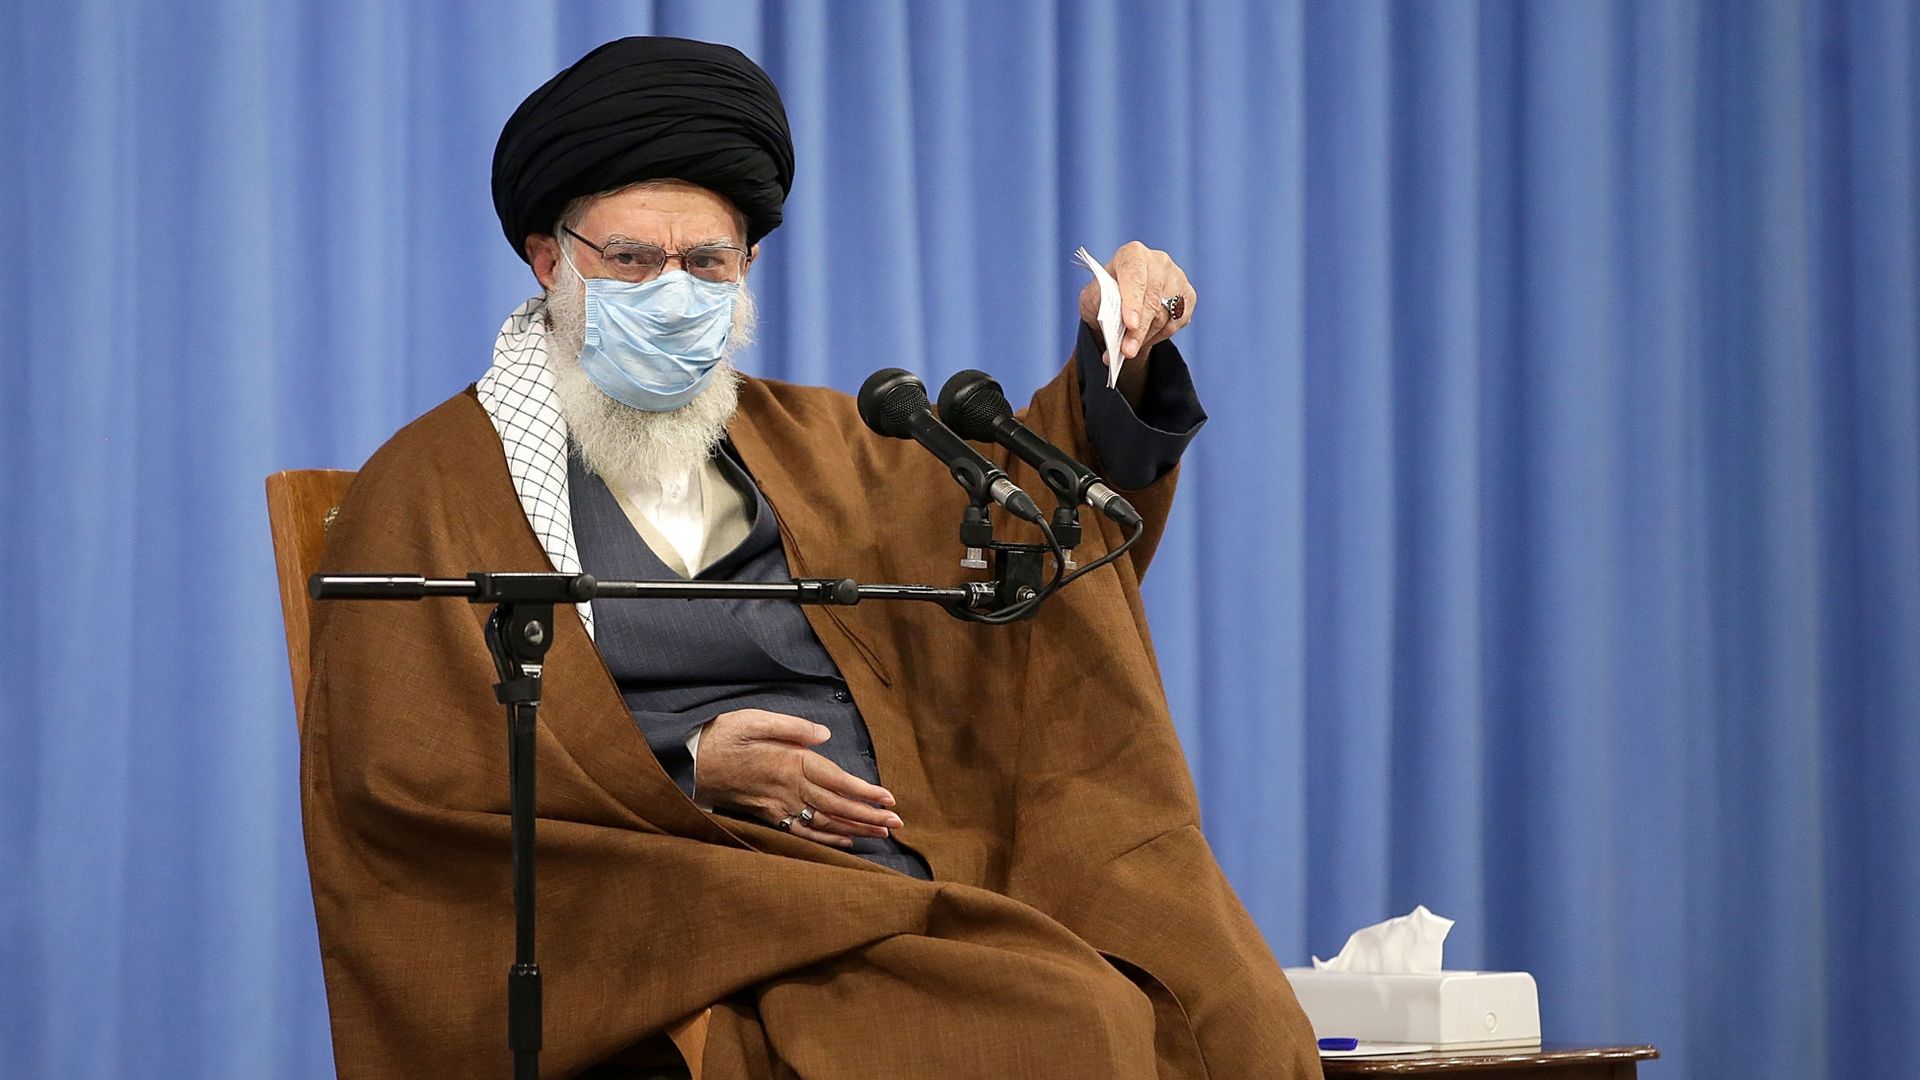 Picture of Iranian supreme leader Ayatollah Ali Khamanei speaking into a microphone